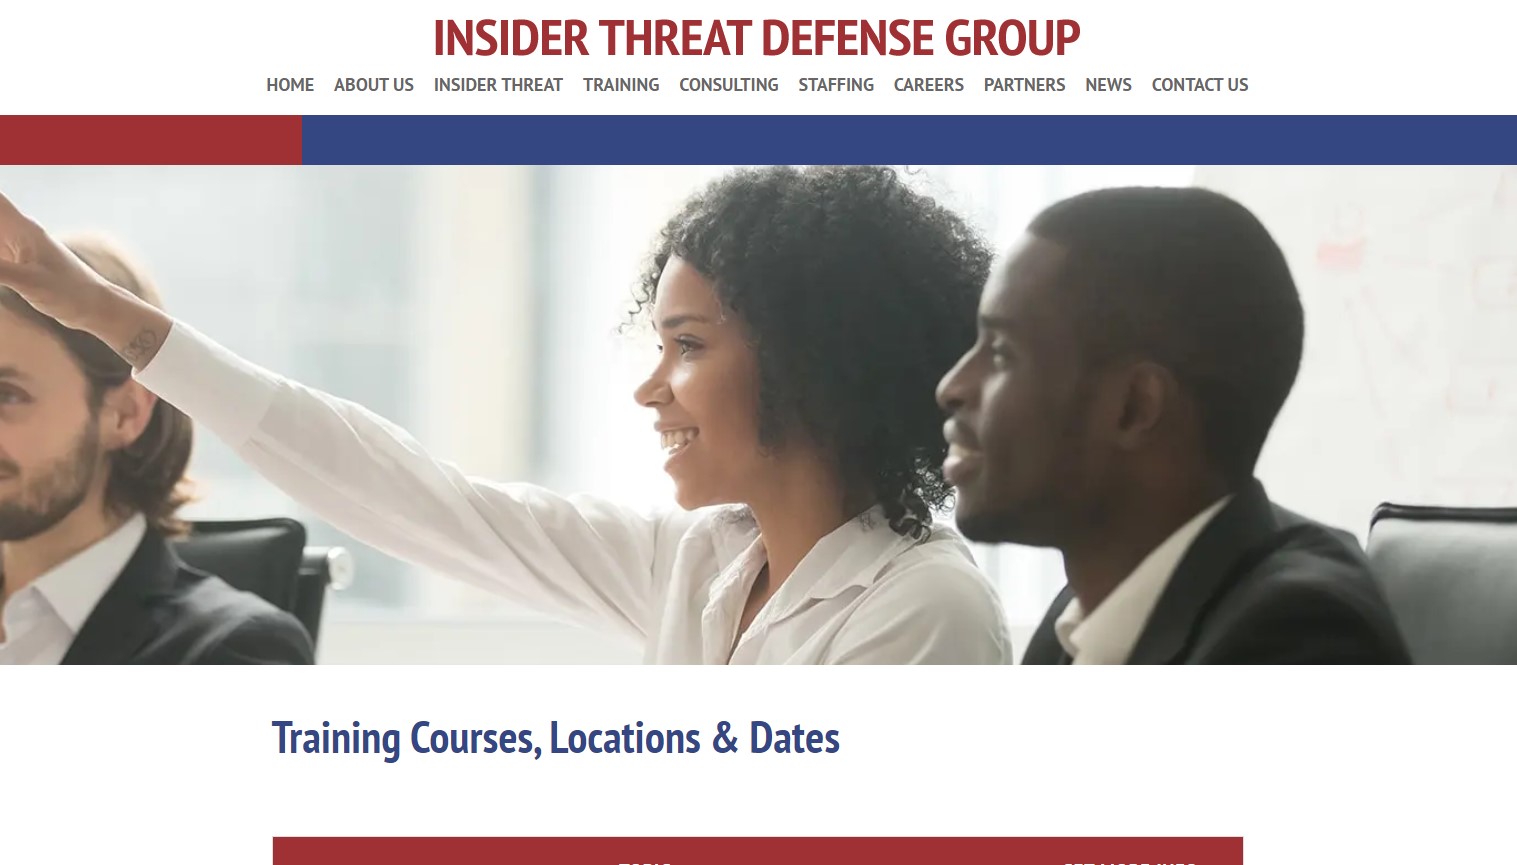 The Insider Threat Defense Group